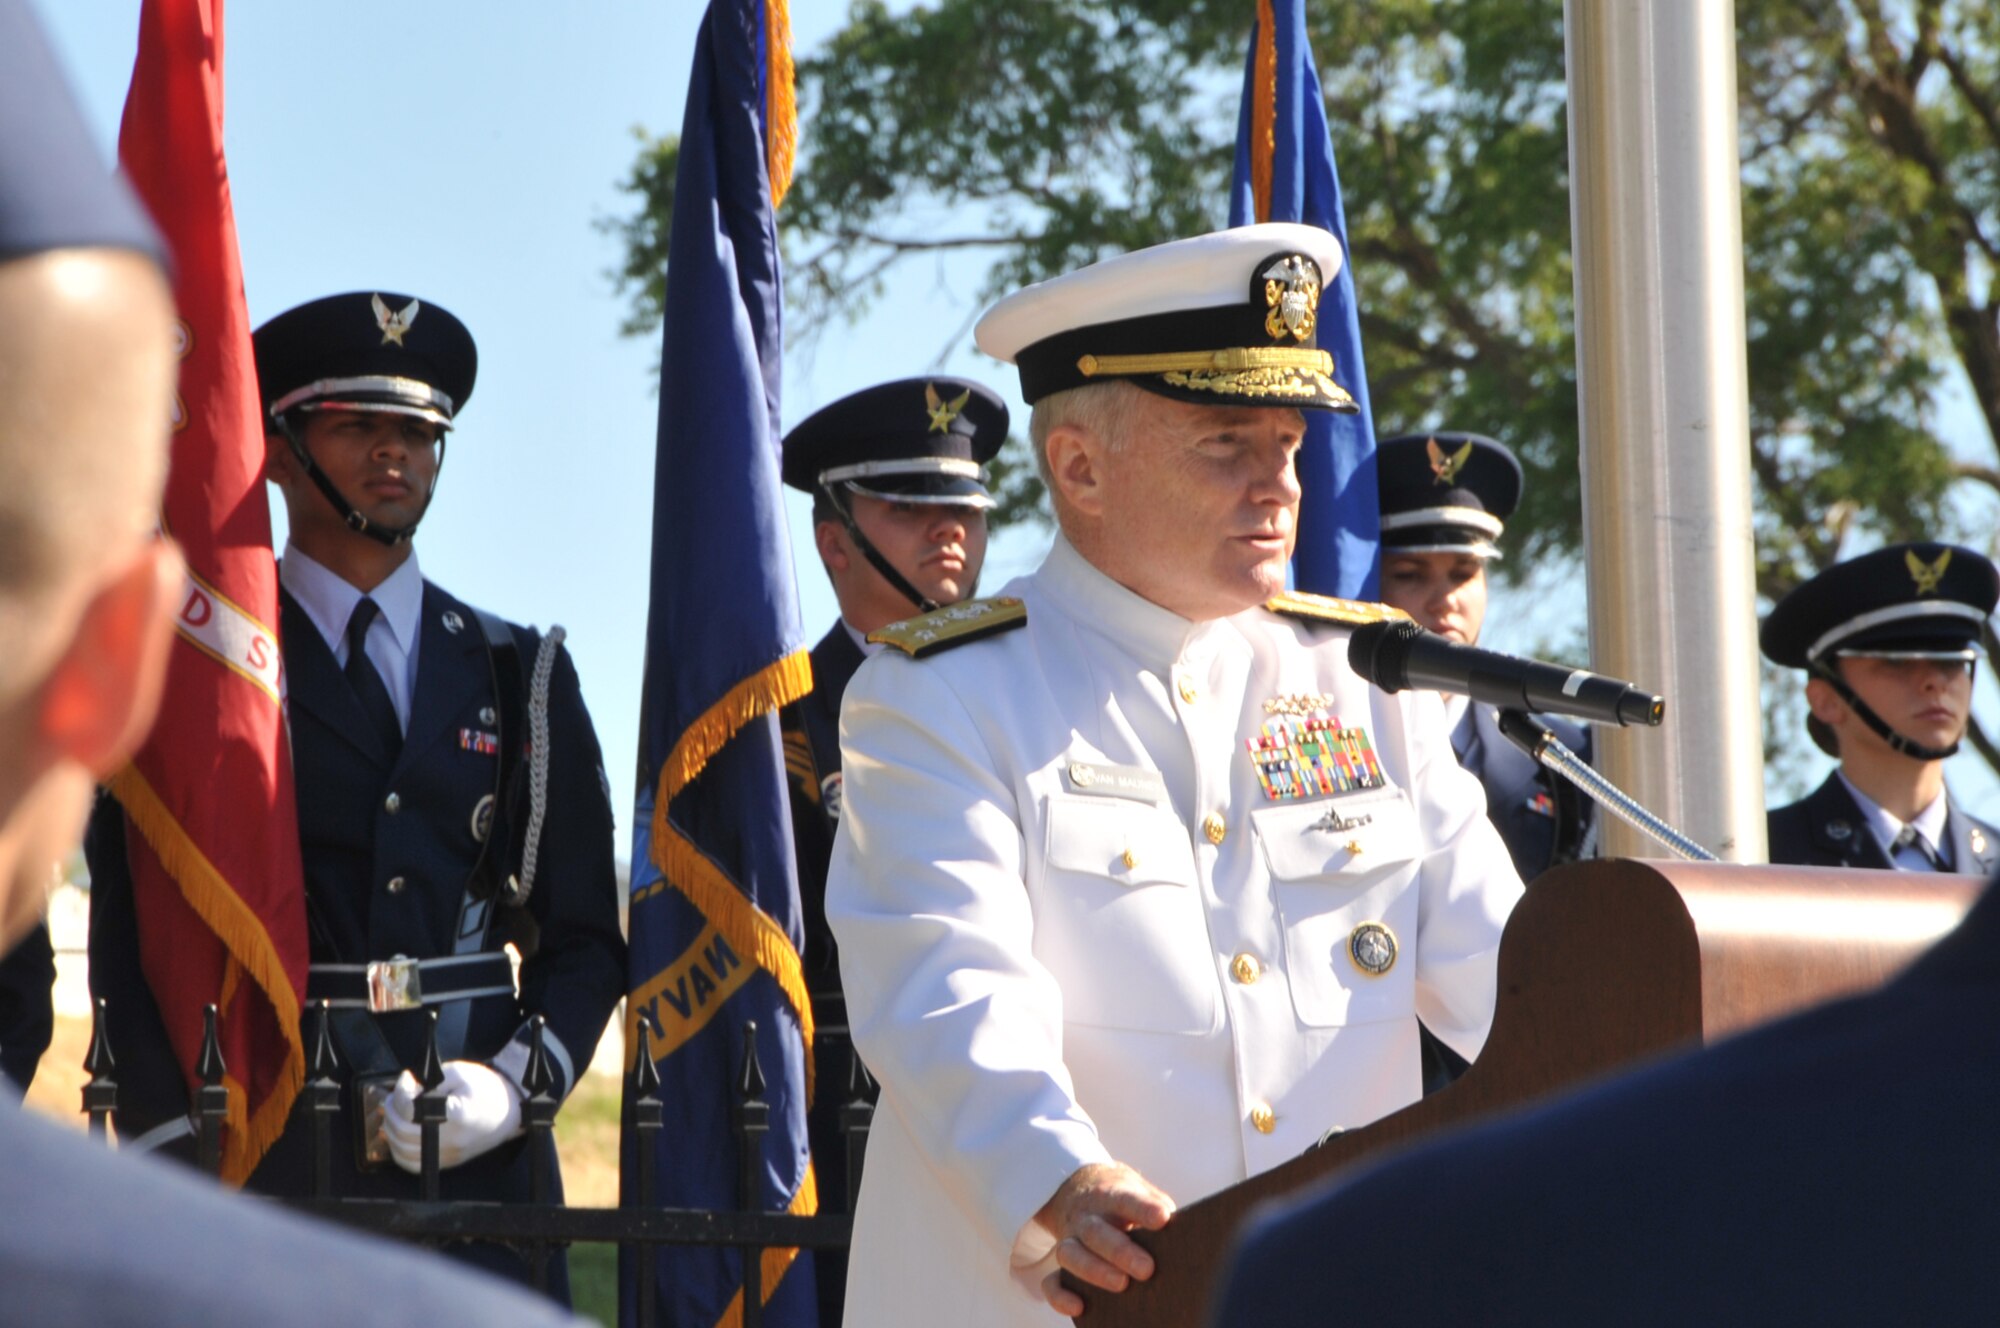 OFFUTT AIR FORCE BASE, Neb. -- Adm. Carl V. Mauney, deputy commander of U.S. Strategic Command, addresses a crowd of more than 100 people at the base cemetery here May 31 during Offutt's Memorial Day Ceremony.  Admiral Mauney was the guest speaker for the service. U.S. Air Force Photo by D.P. Heard